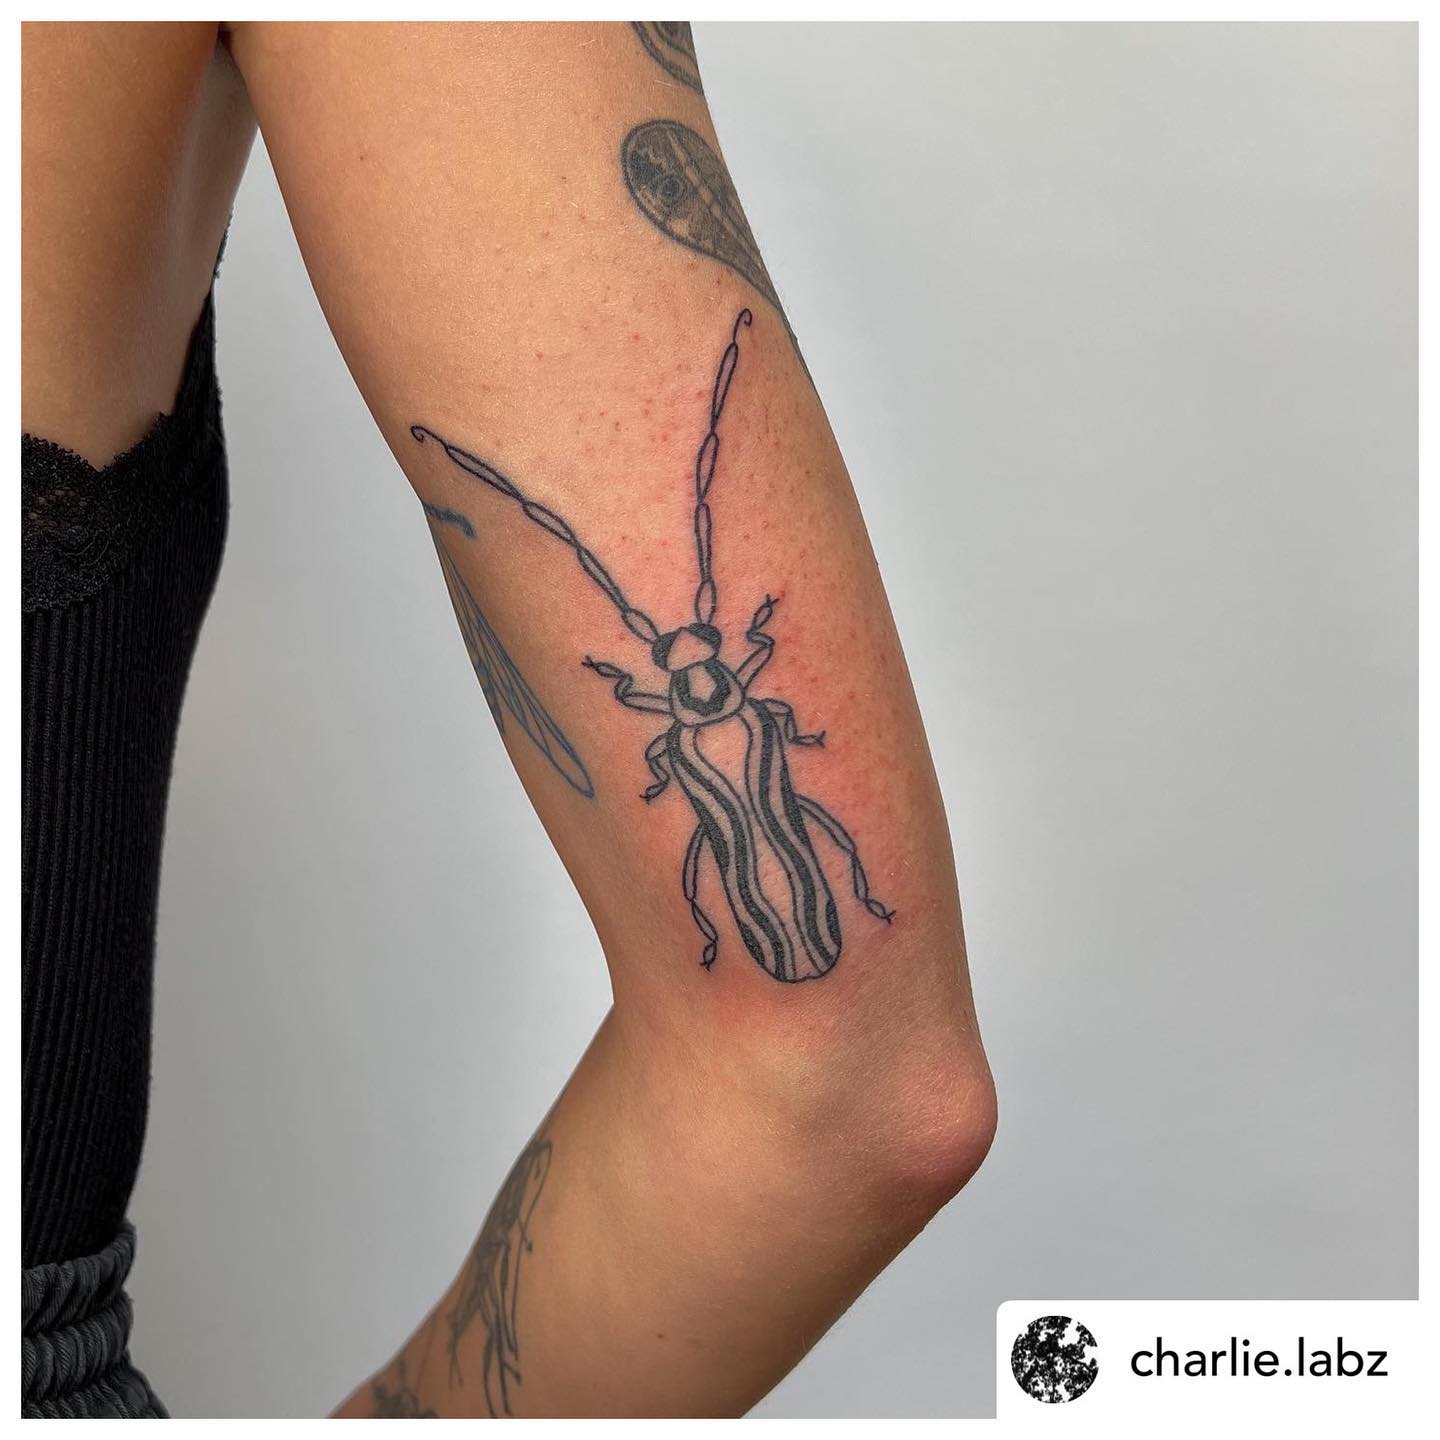 Tattoo by @charlie.labz Link in bio to book.